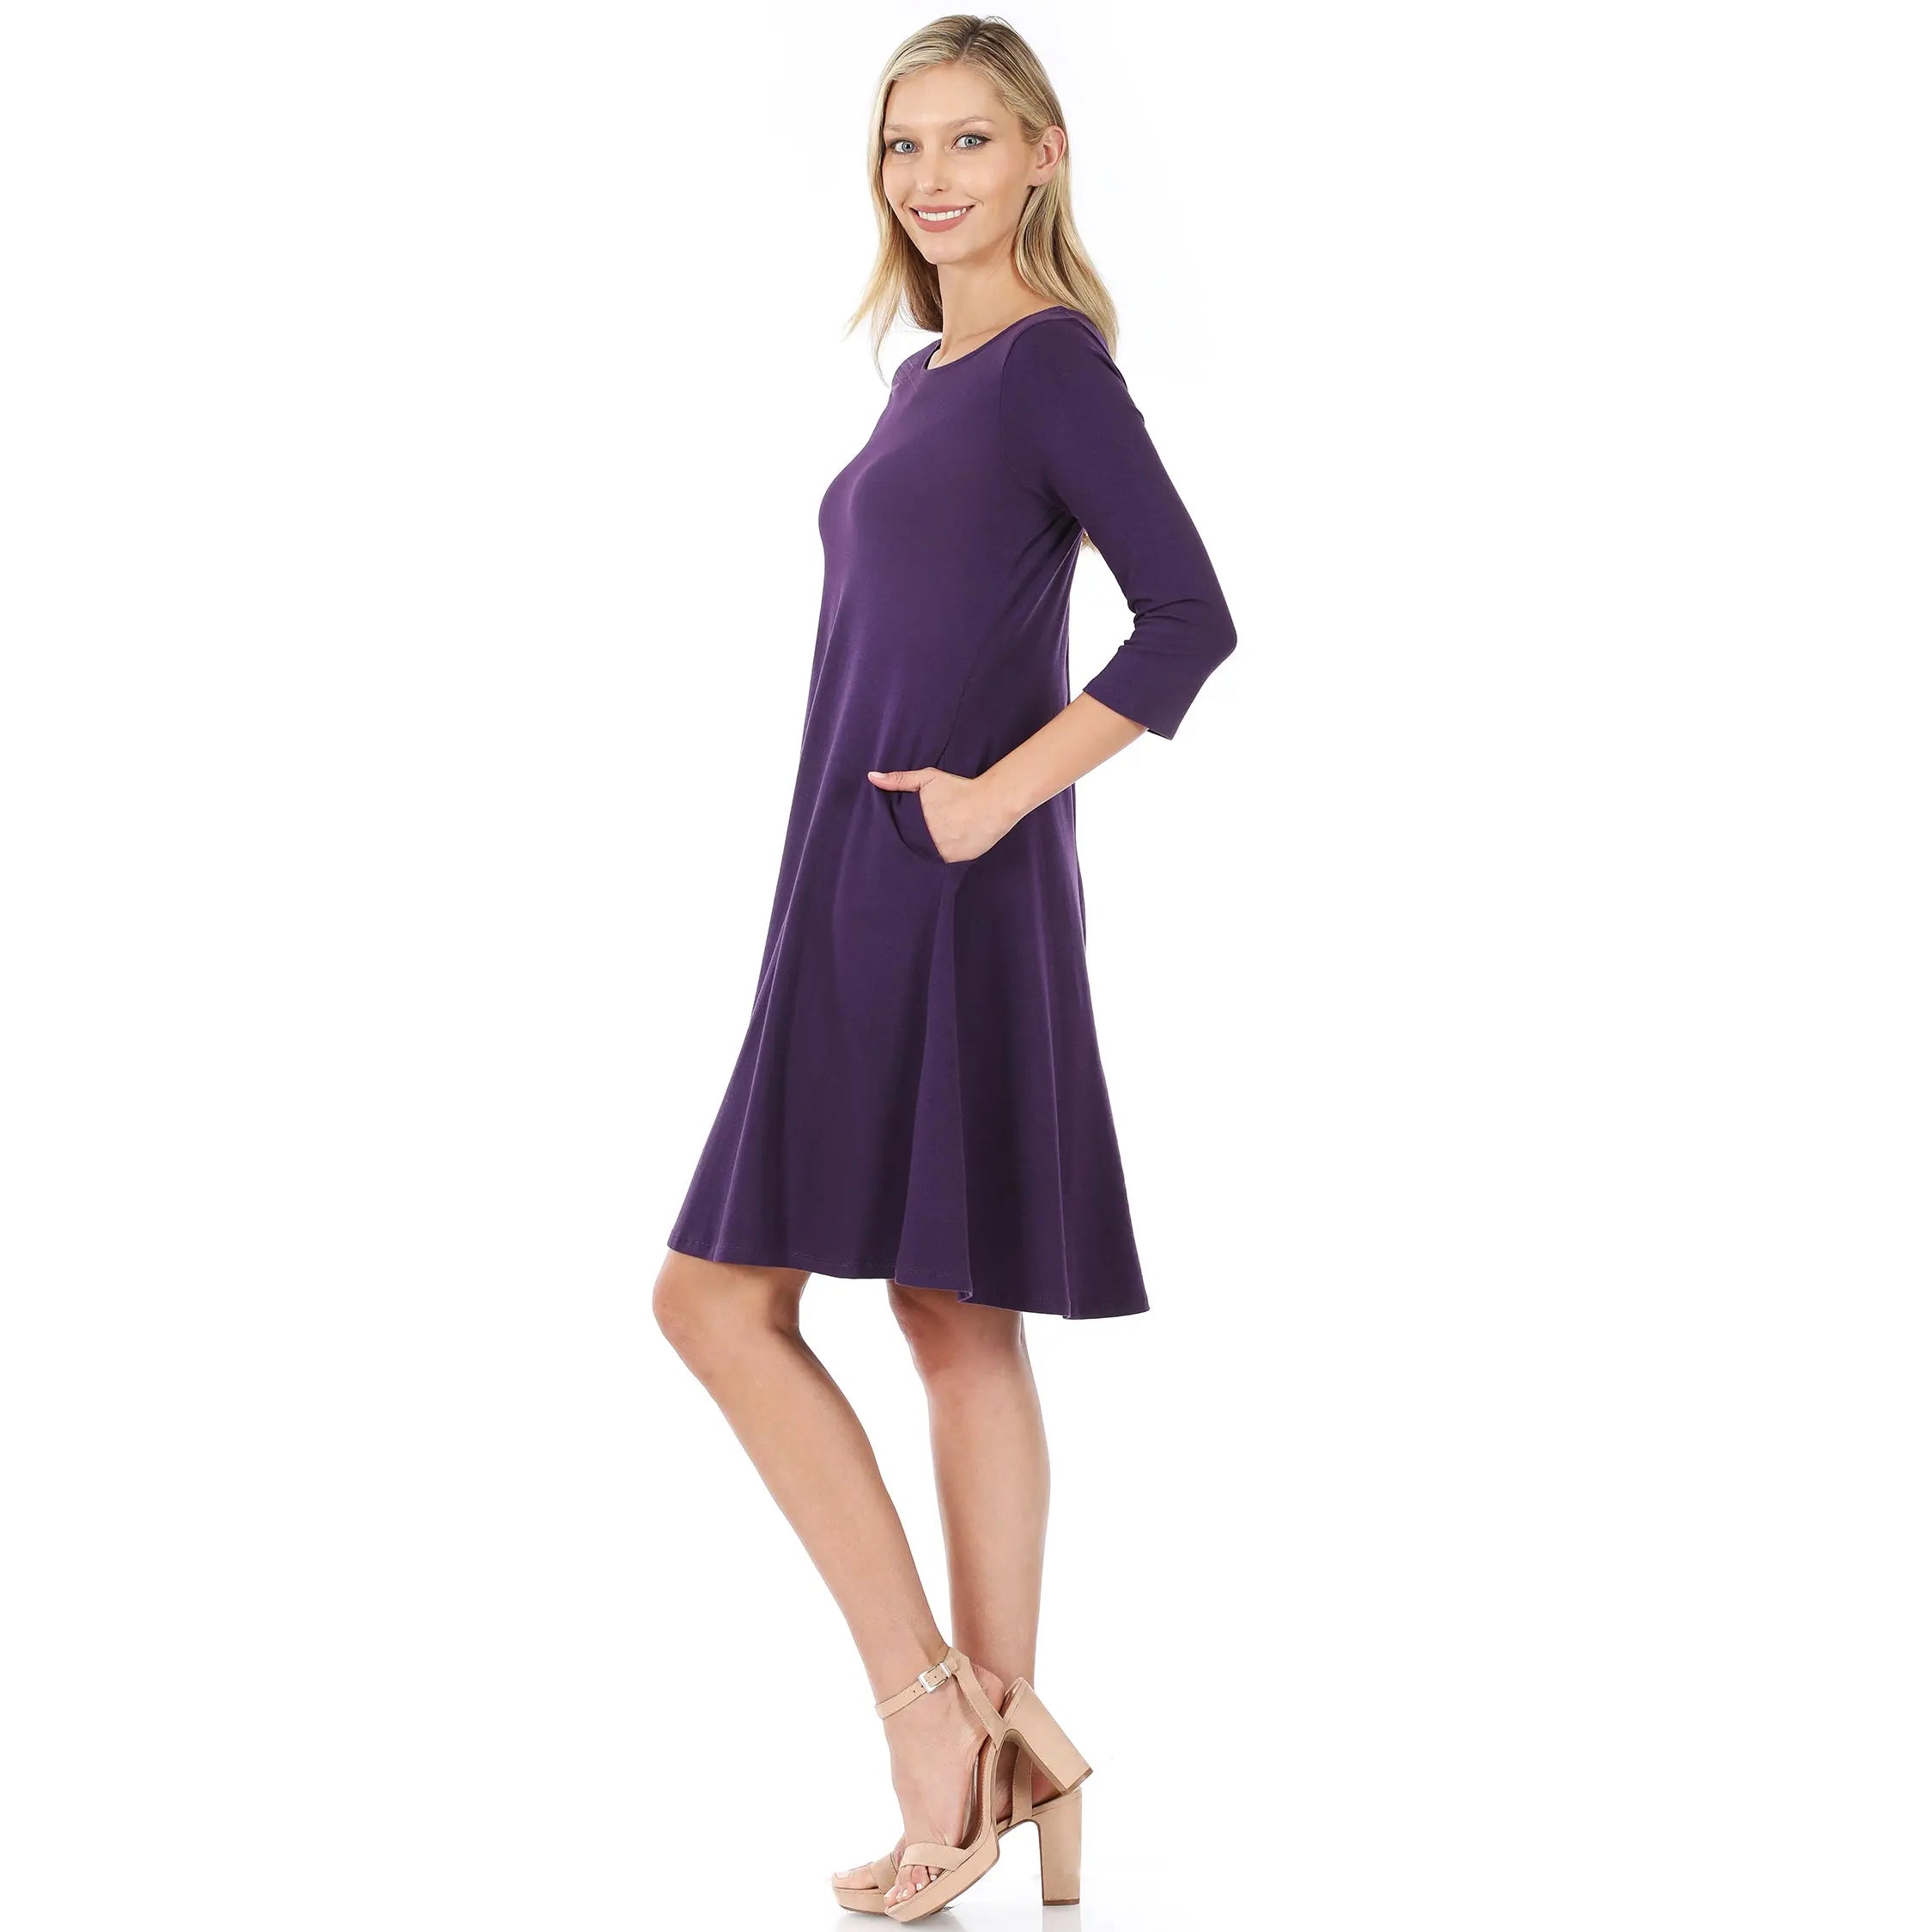 No-4596P PREMIUM COTTON CLASSIC A LINE DRESS SIDE POCKETS Style - Cathy,s new look 